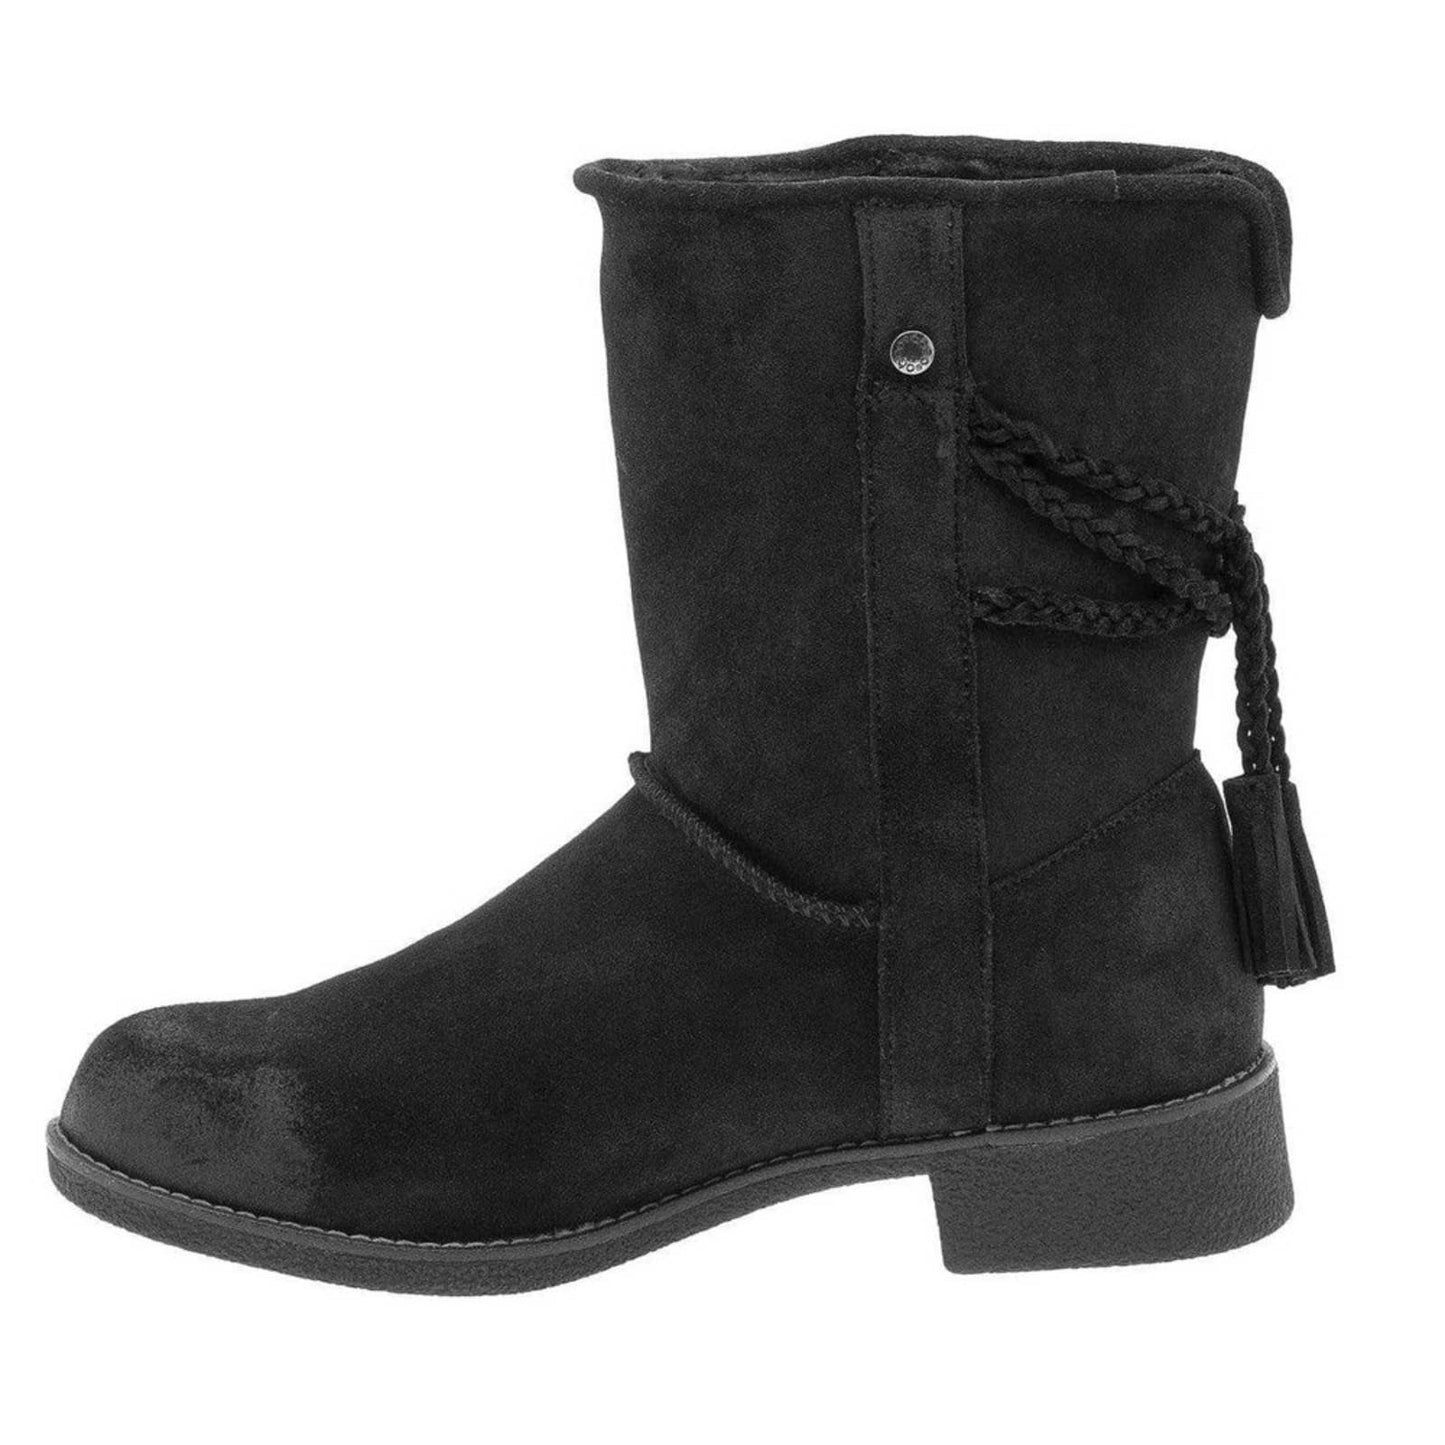 NWT abeo Pro Blaine Black Suede Sheep Sheerling Winter Boots